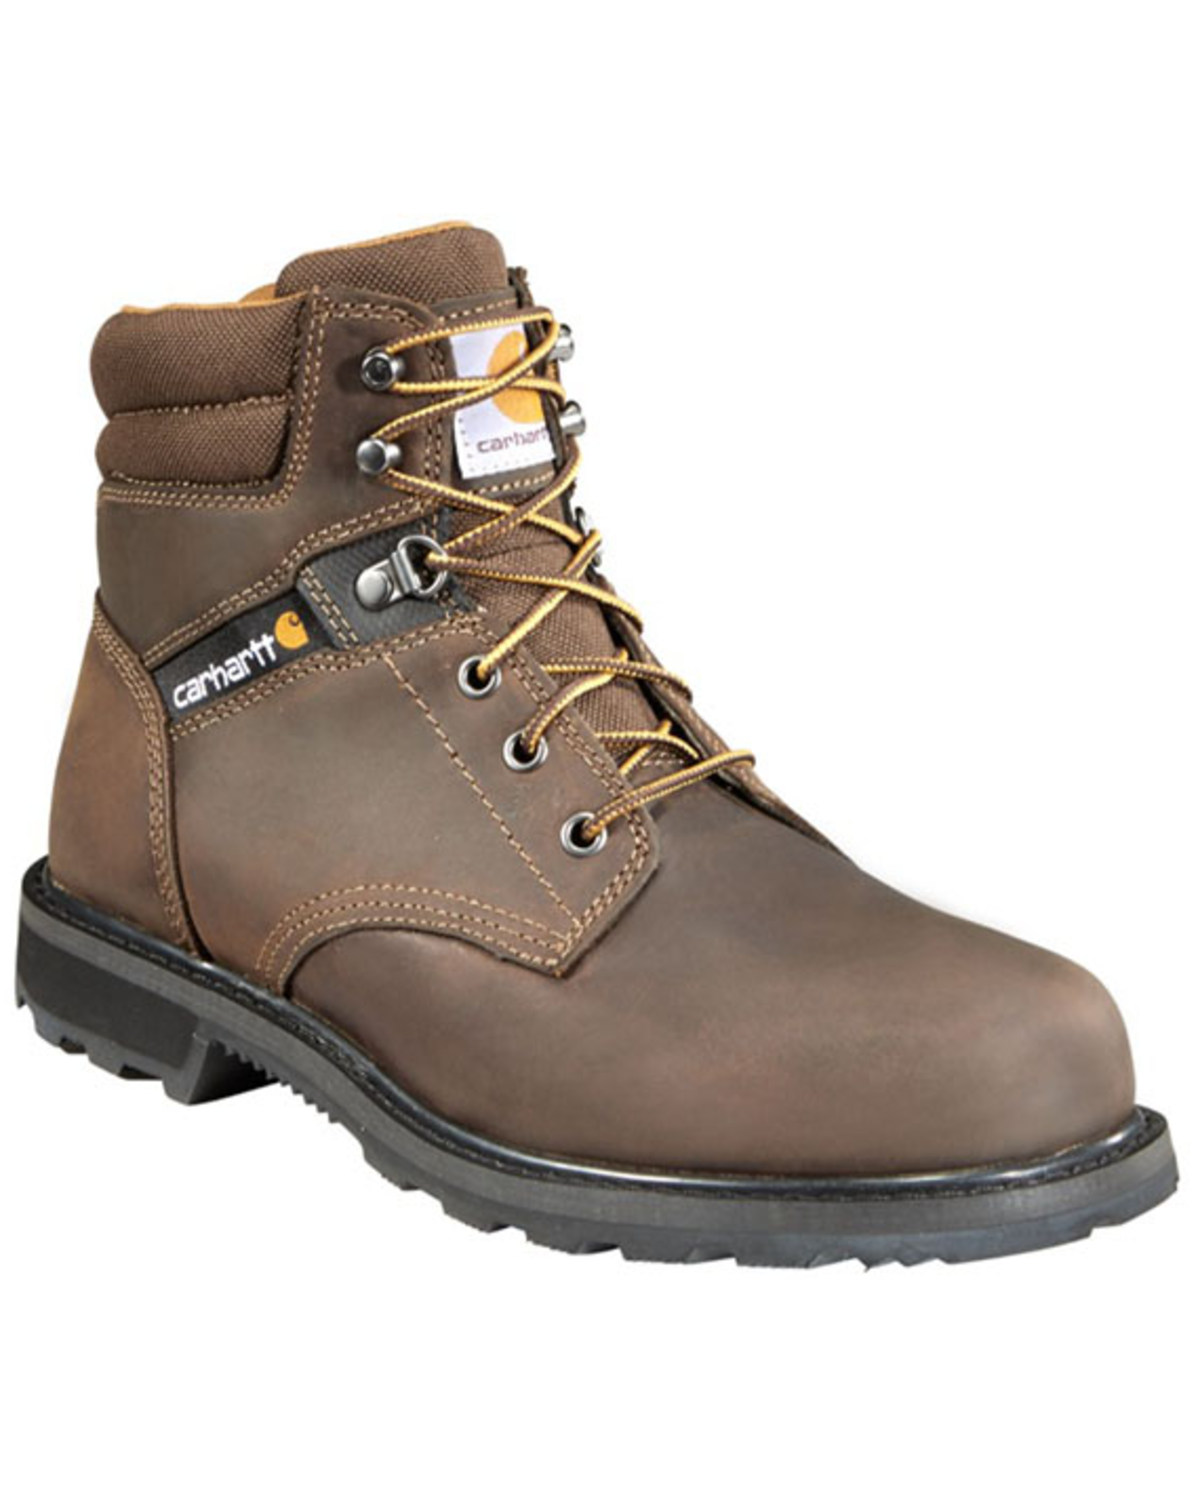 Carhartt Men's 6" Lace-Up Work Boots - Round Toe